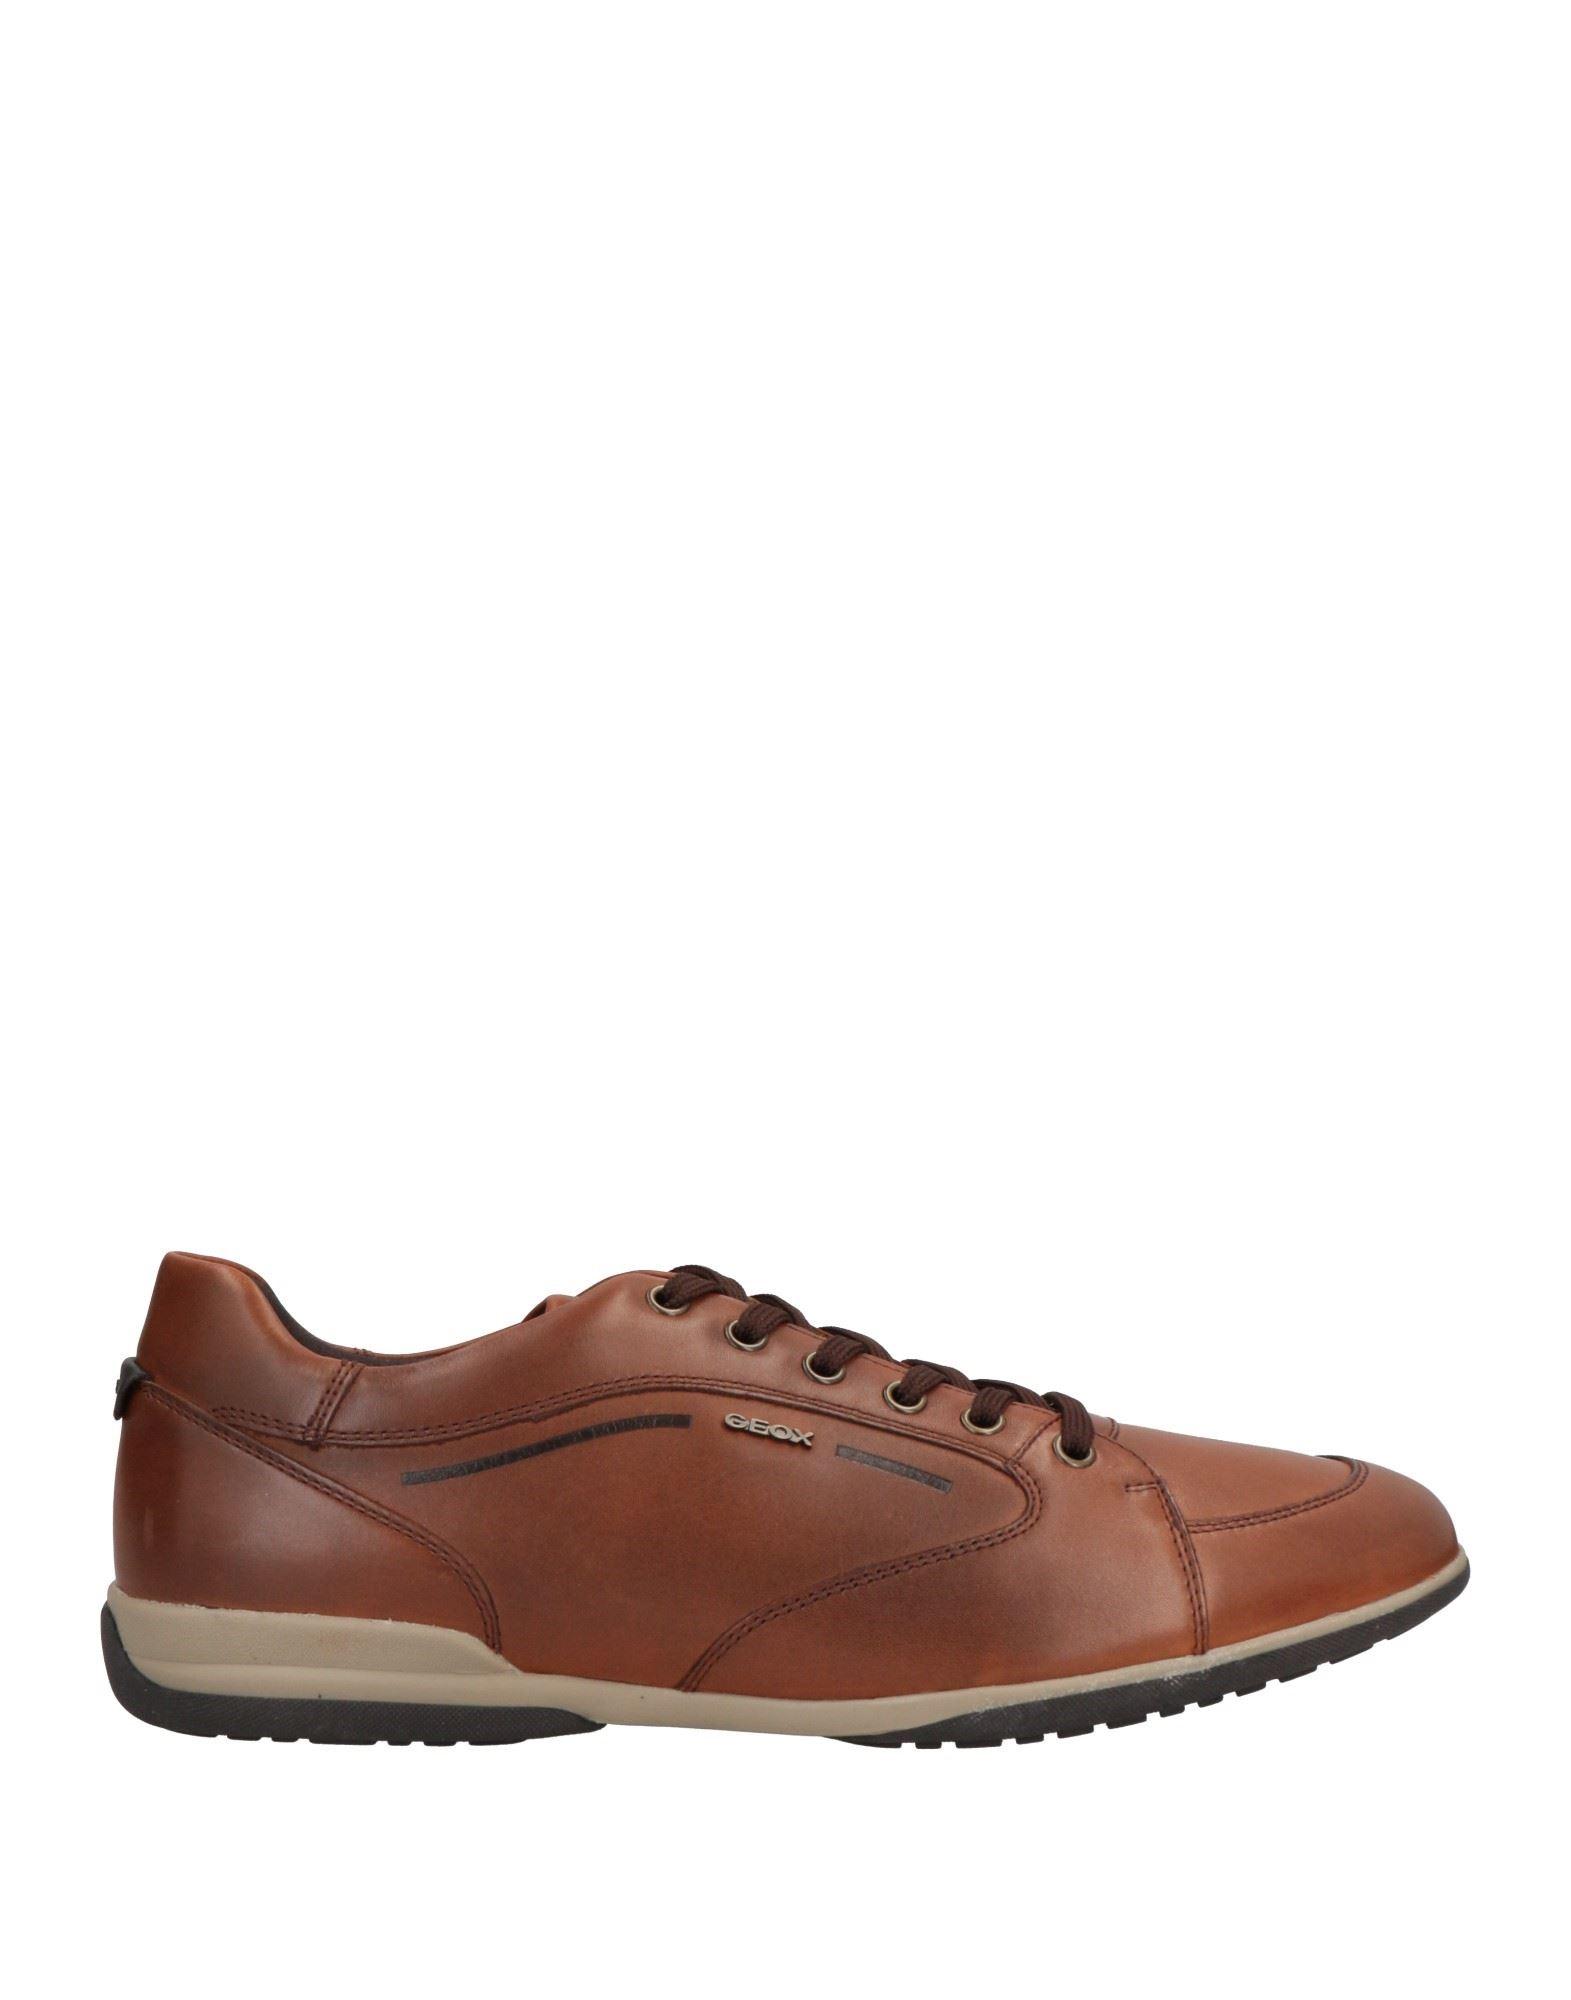 Geox Leather Sneakers in Tan (Brown) for Men | Lyst